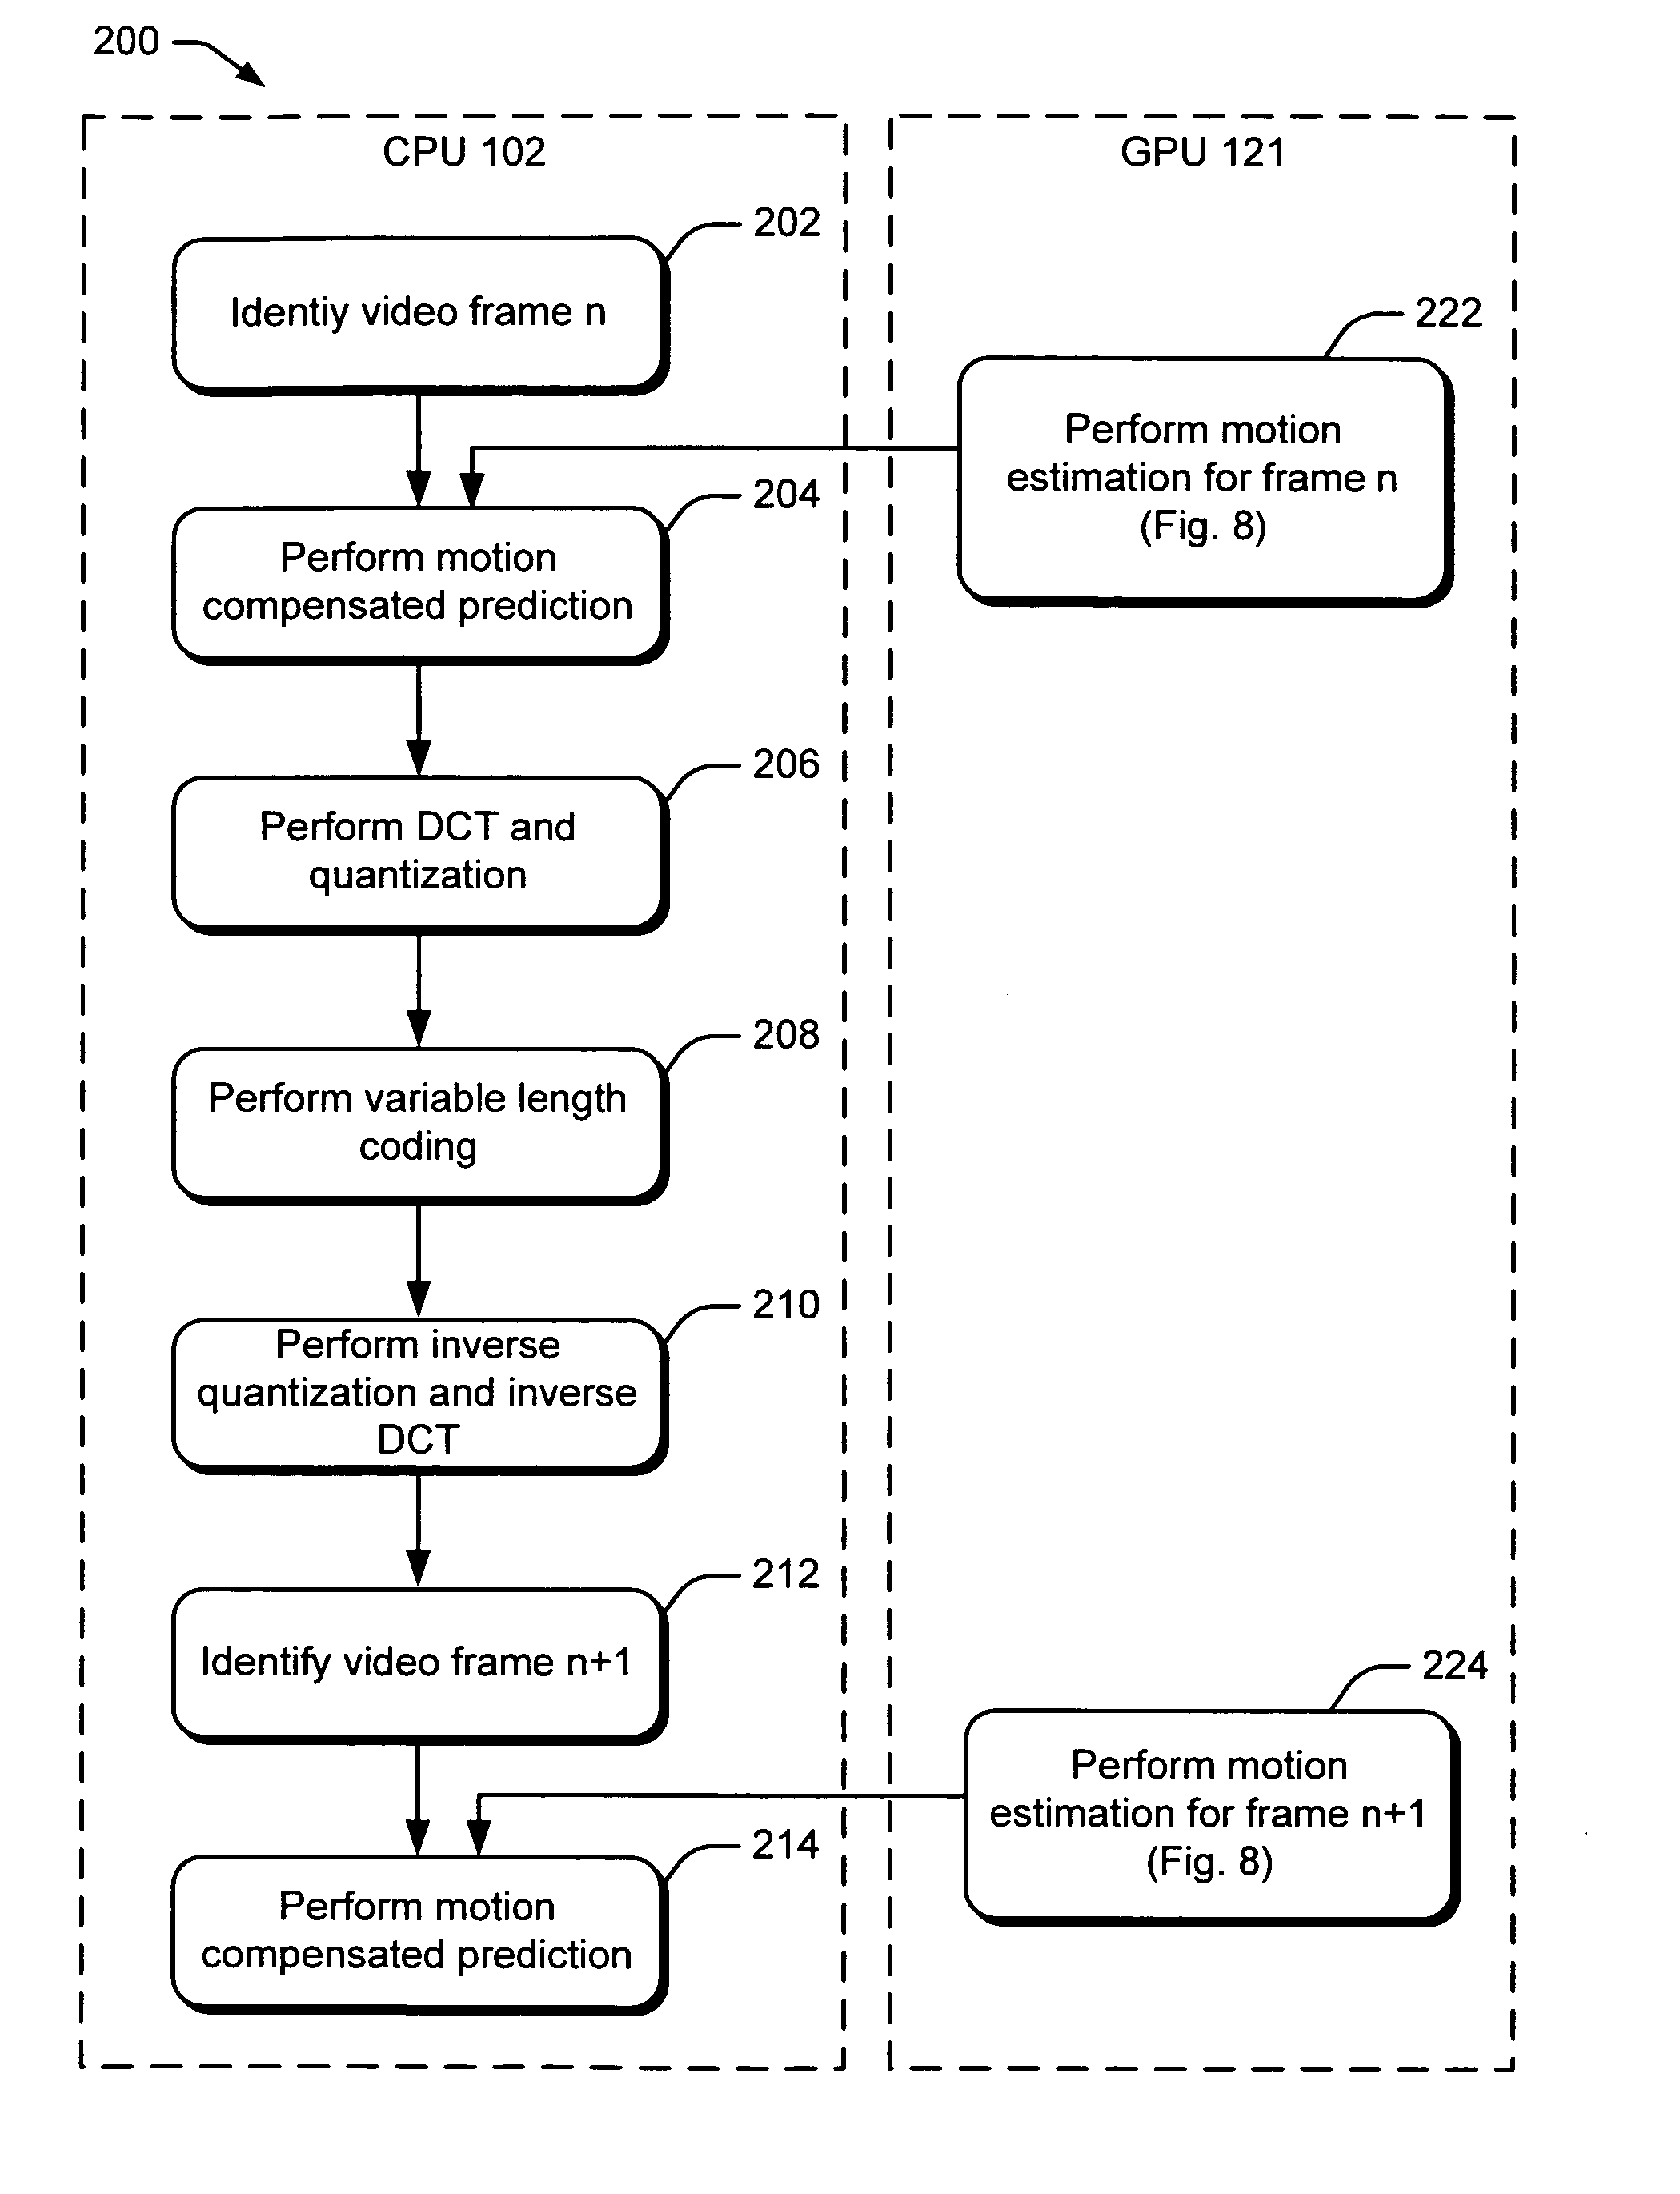 Accelerated video encoding using a graphics processing unit